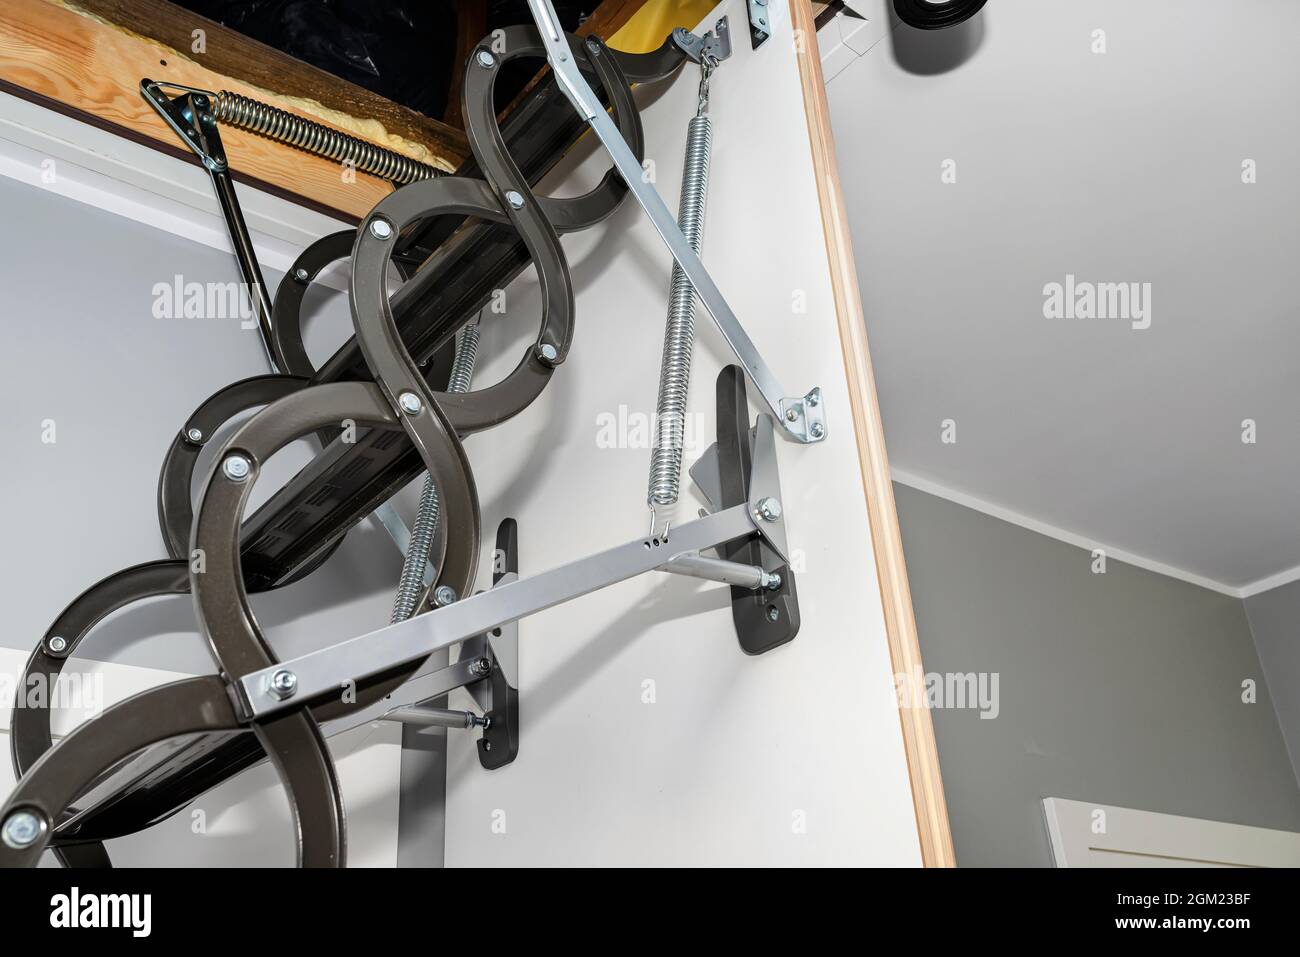 A spring tensioning mechanism that facilitates the opening of a metal ladder to the attic, as well as hinges and stabilizers, located in the ceiling o Stock Photo